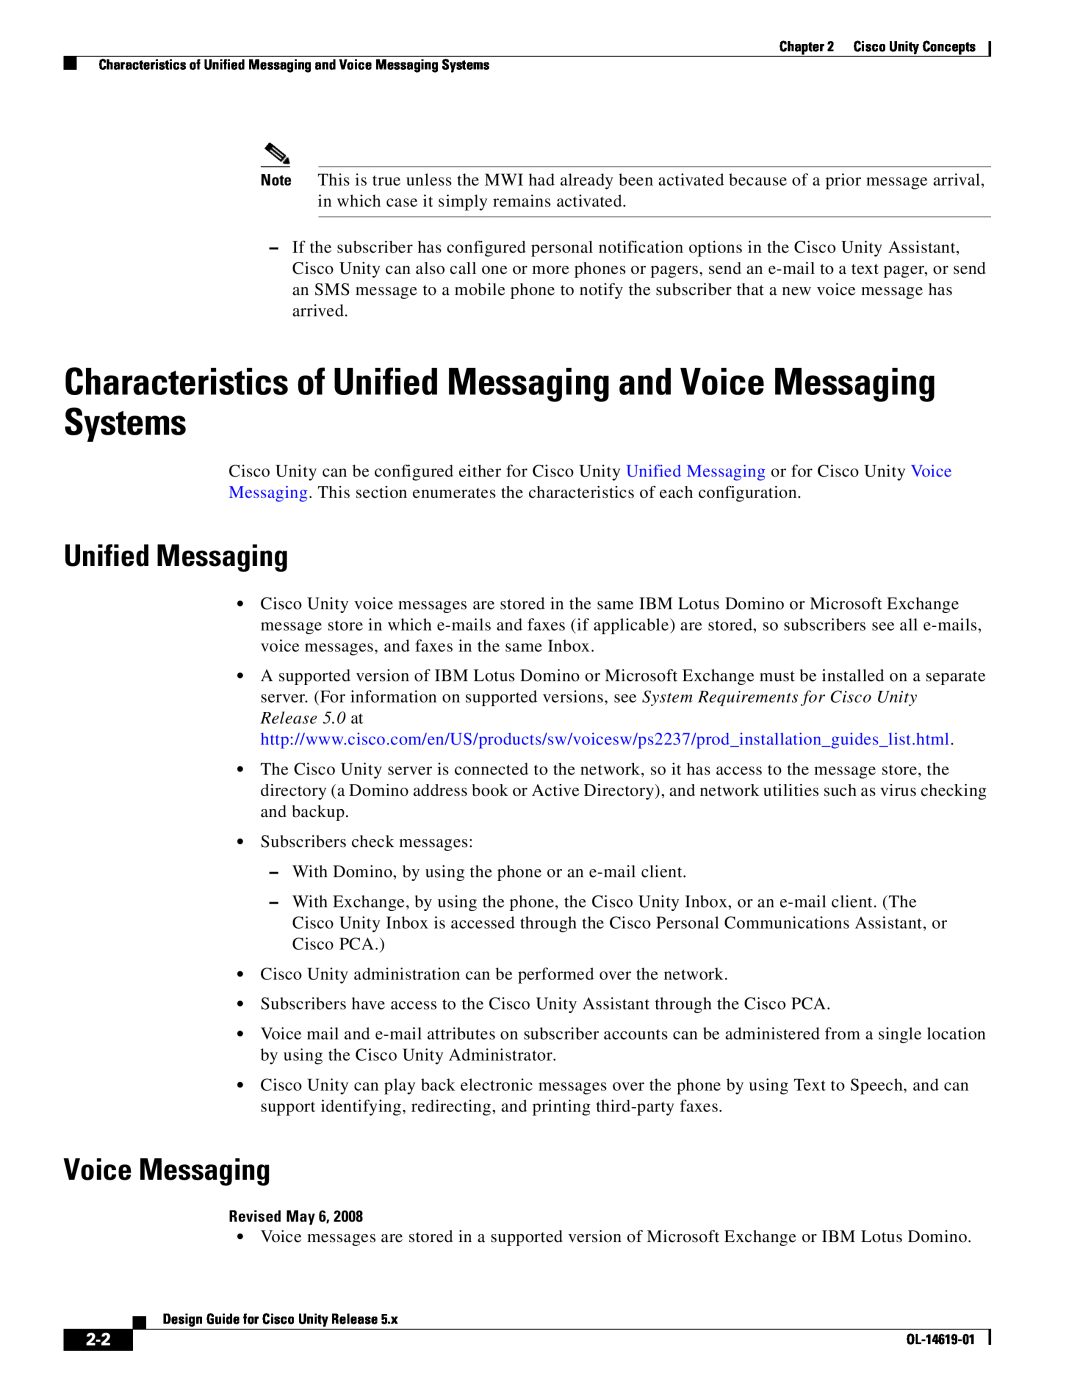 Cisco Systems OL-14619-01 manual Characteristics of Unified Messaging and Voice Messaging Systems 